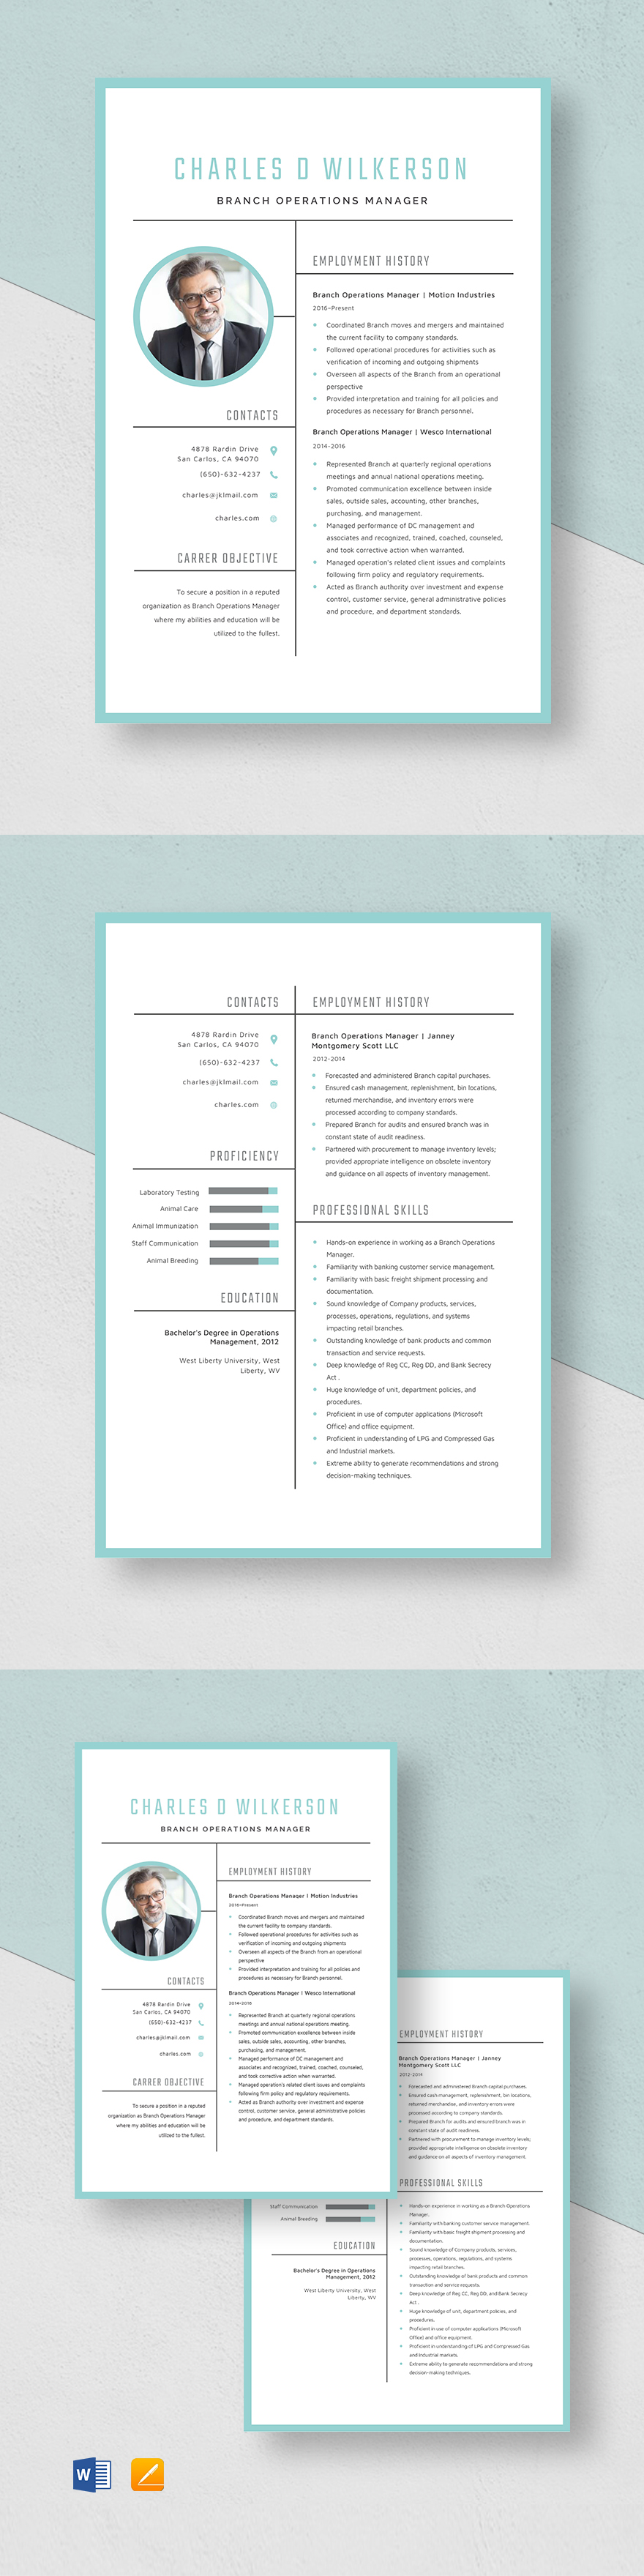 Free Branch Operations Manager Resume Template